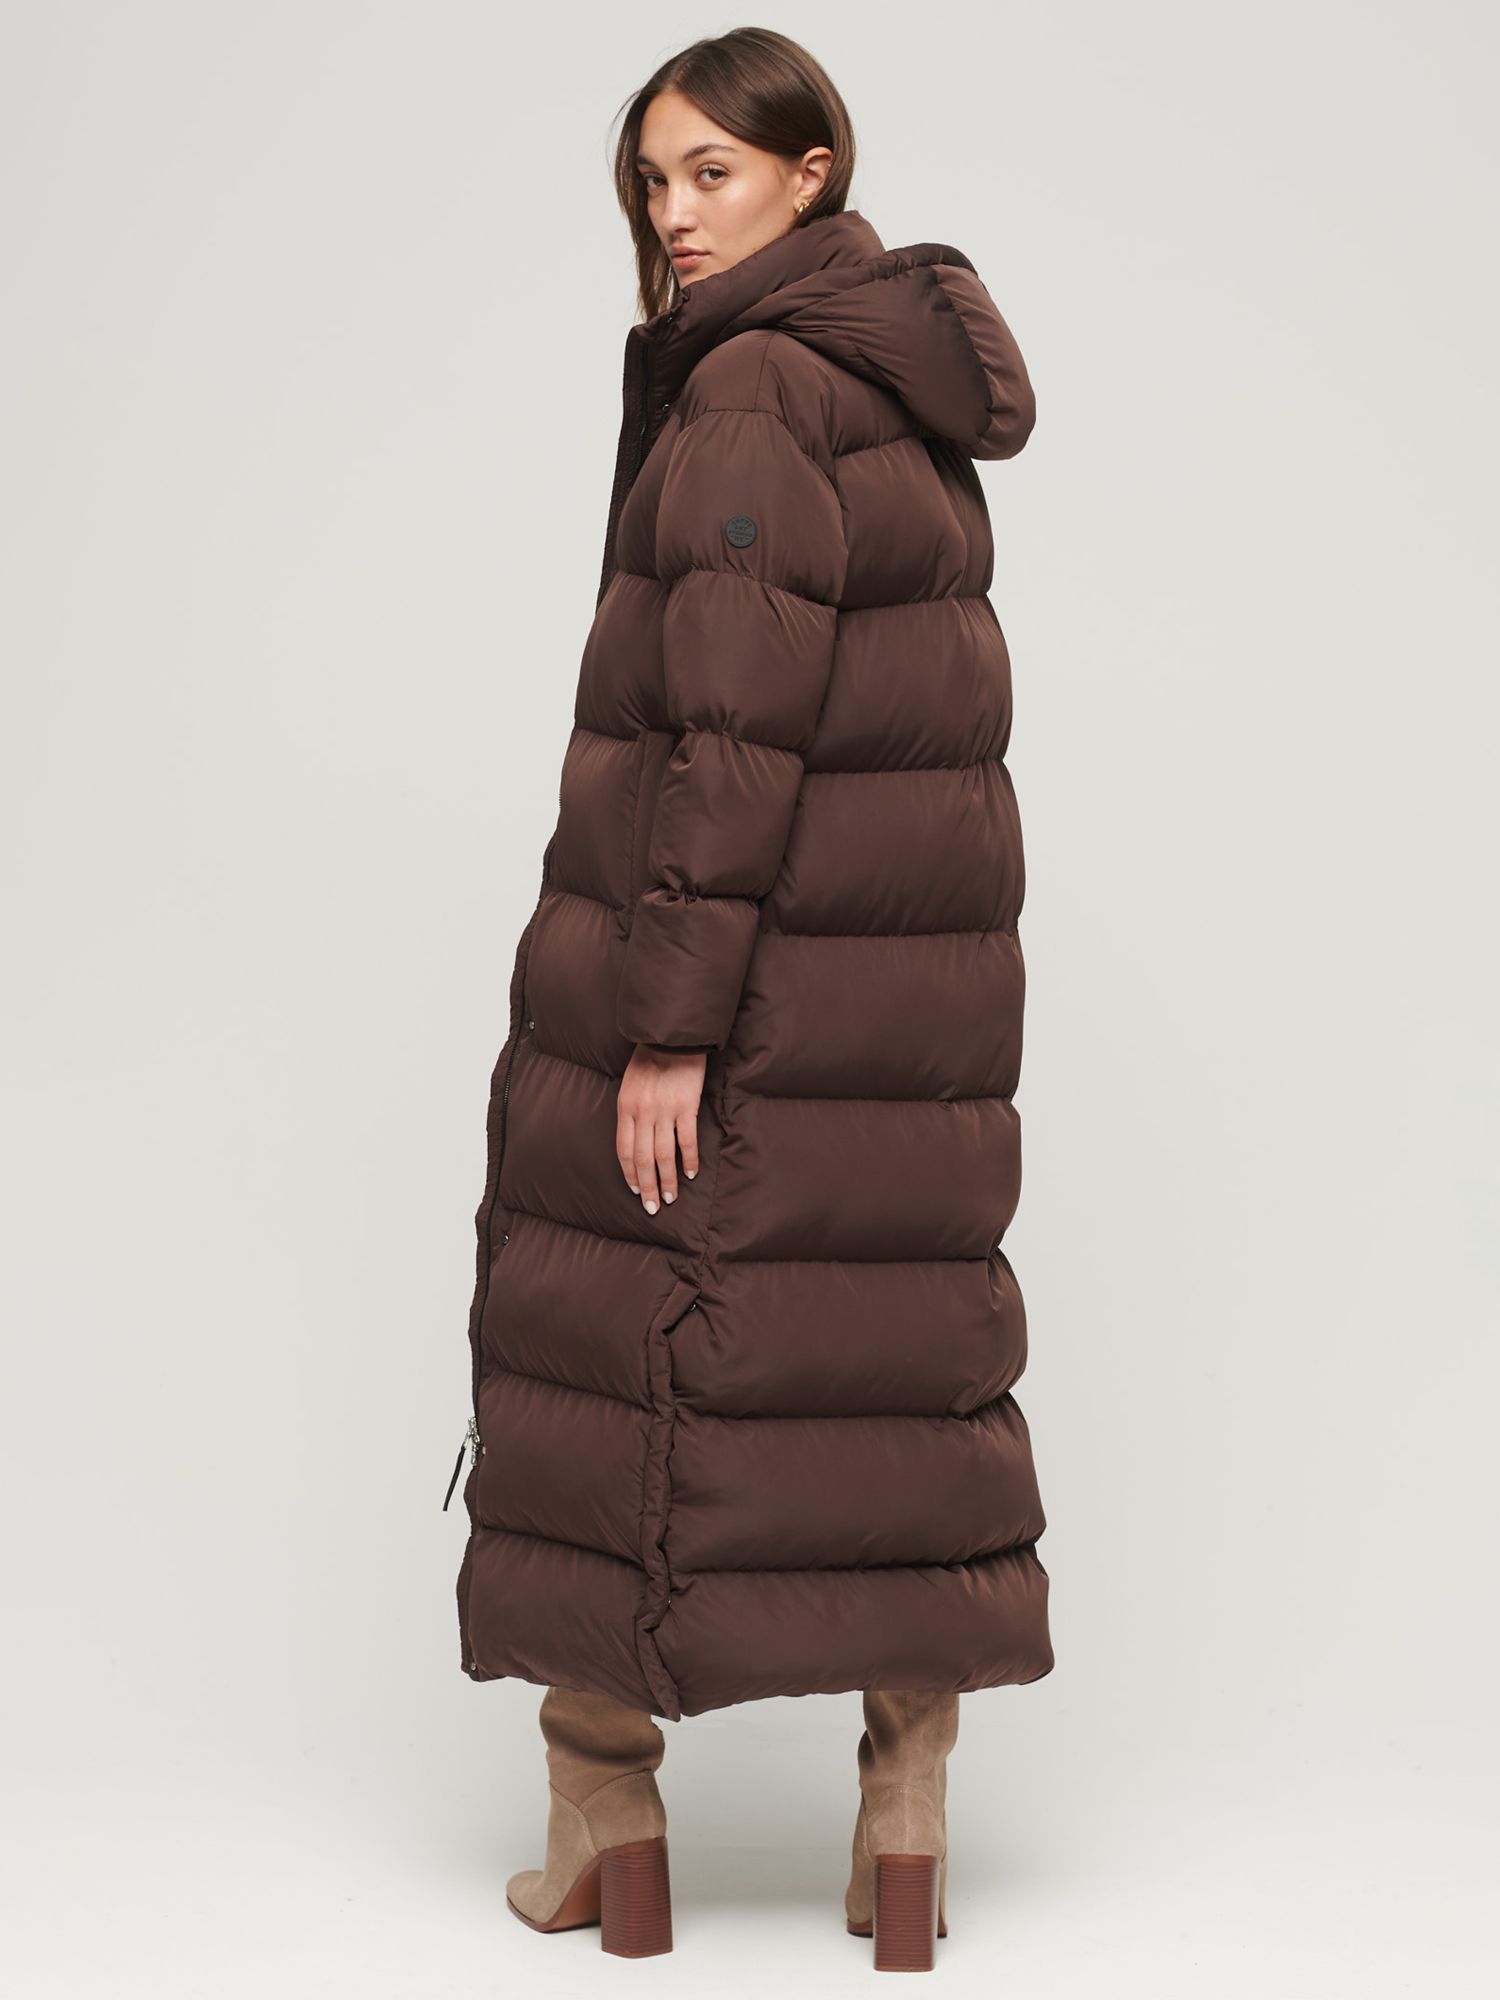 Buy Superdry Maxi Hooded Puffer Coat Online at johnlewis.com